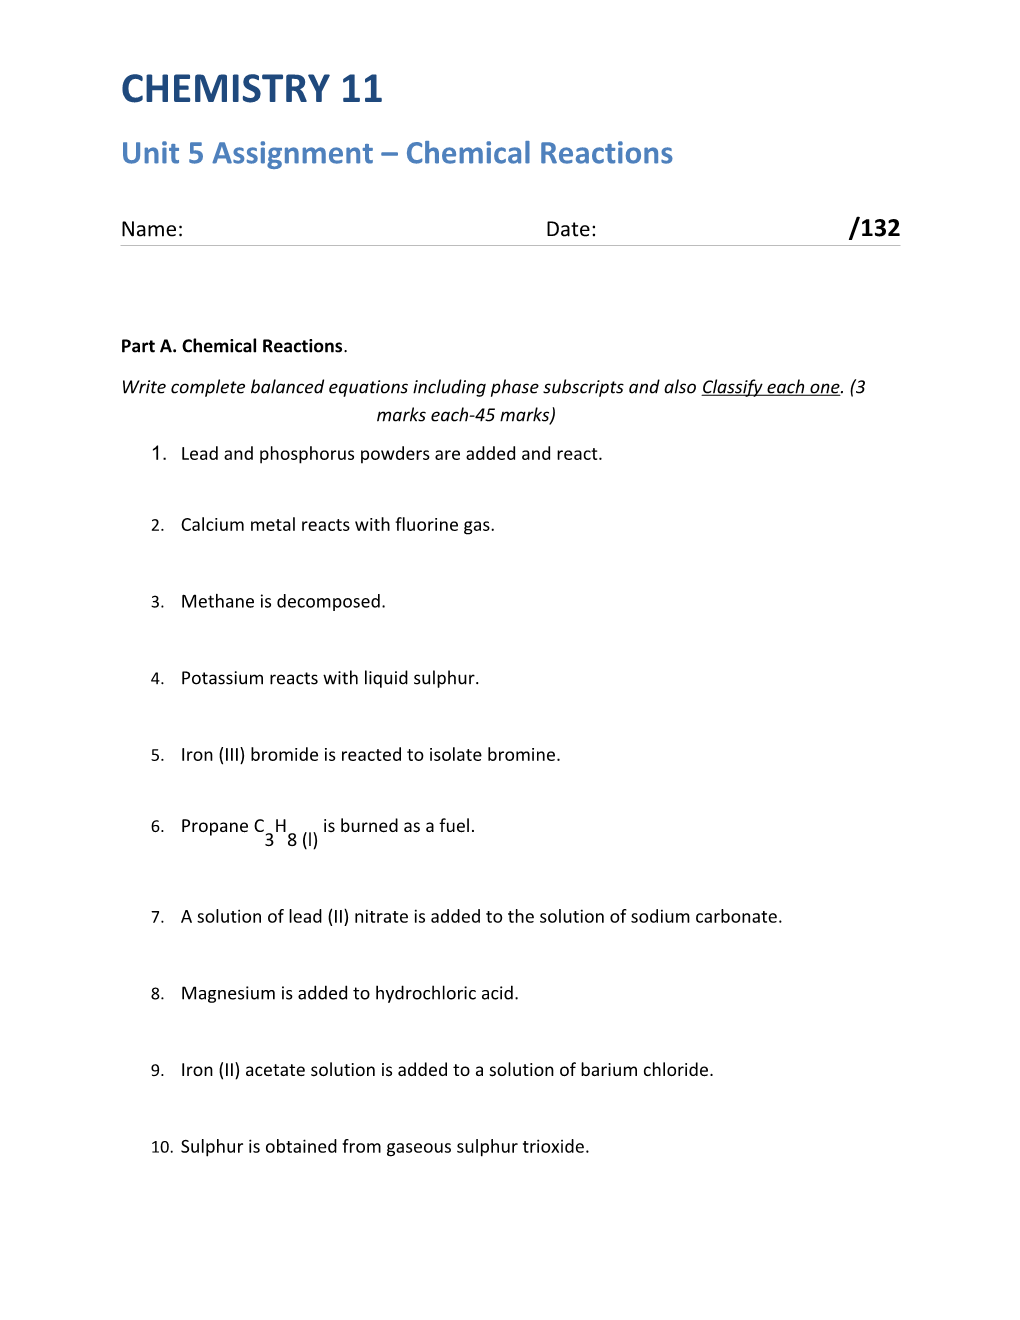 Unit 5 Assignment Chemical Reactions